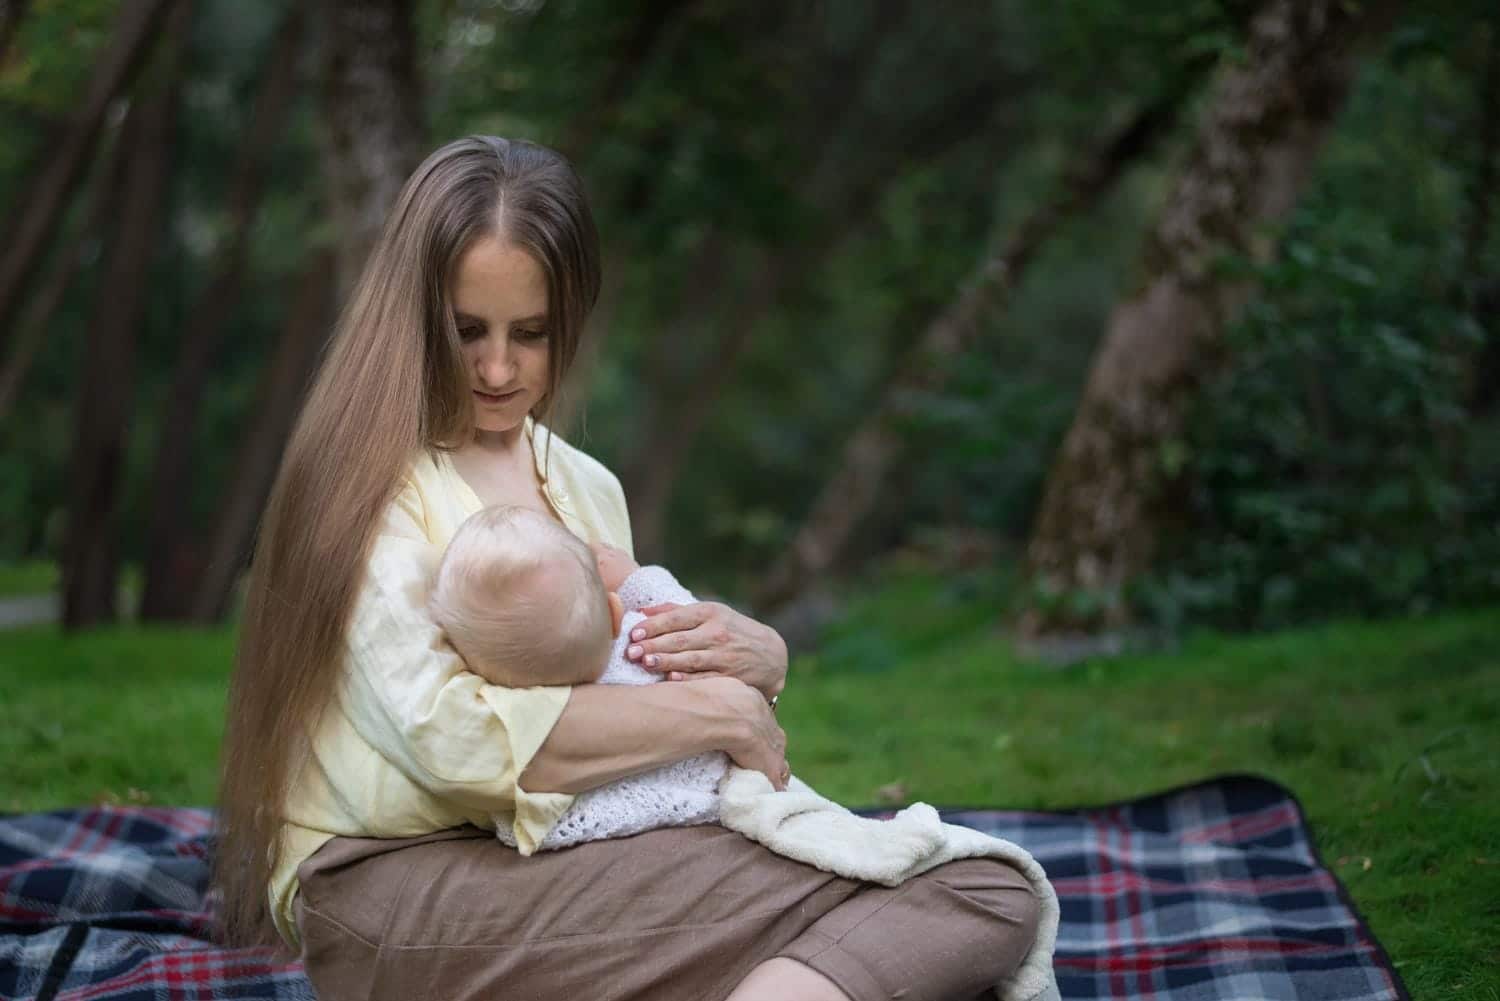 Image showing women breast feeding her child.